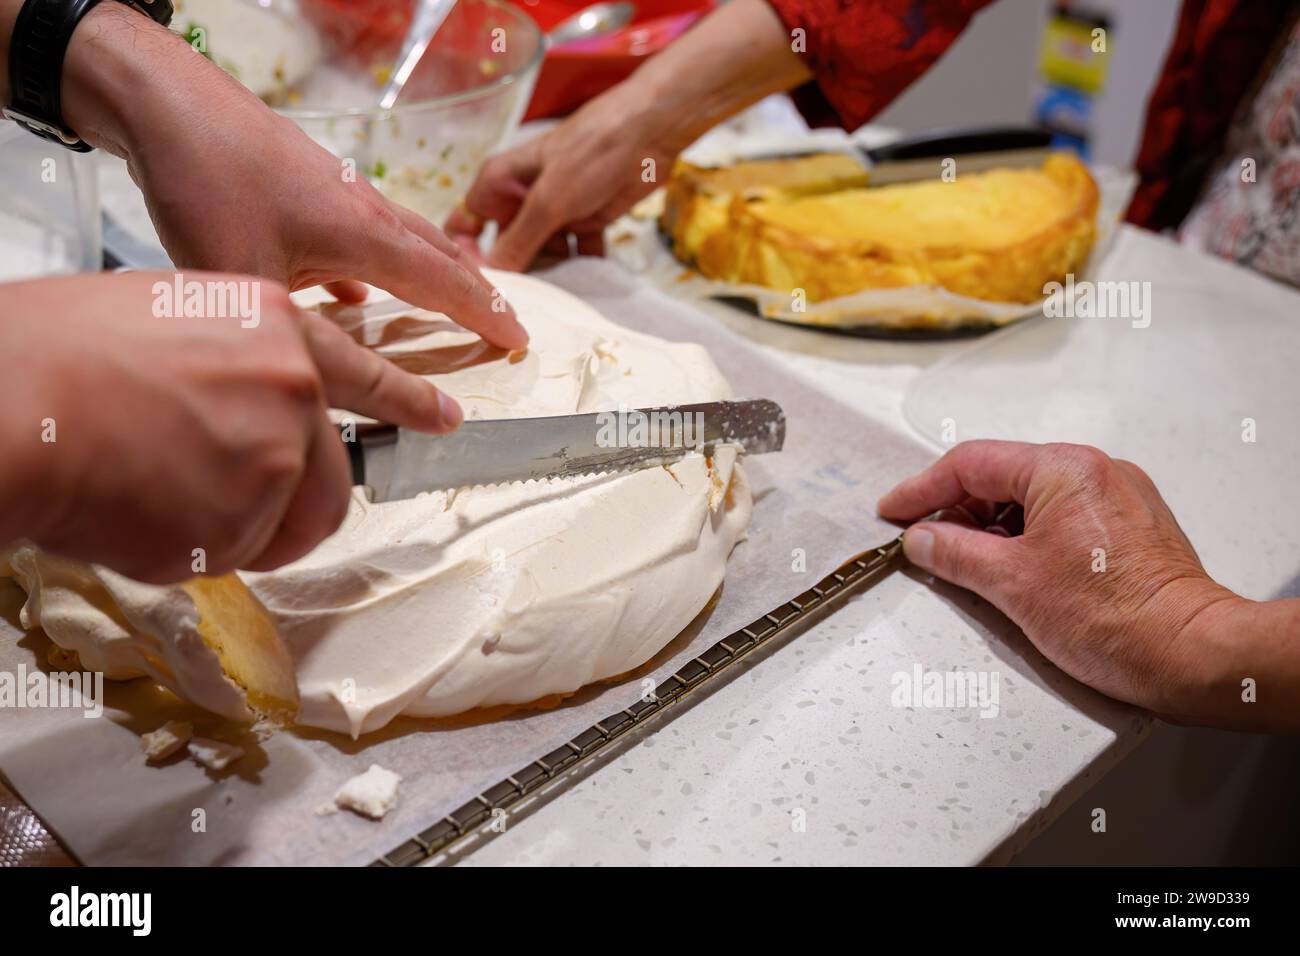 Hands holding knife and cutting an undecorated pavlova on kitchen benchtop. Home cooking and entertainment concept. Stock Photo